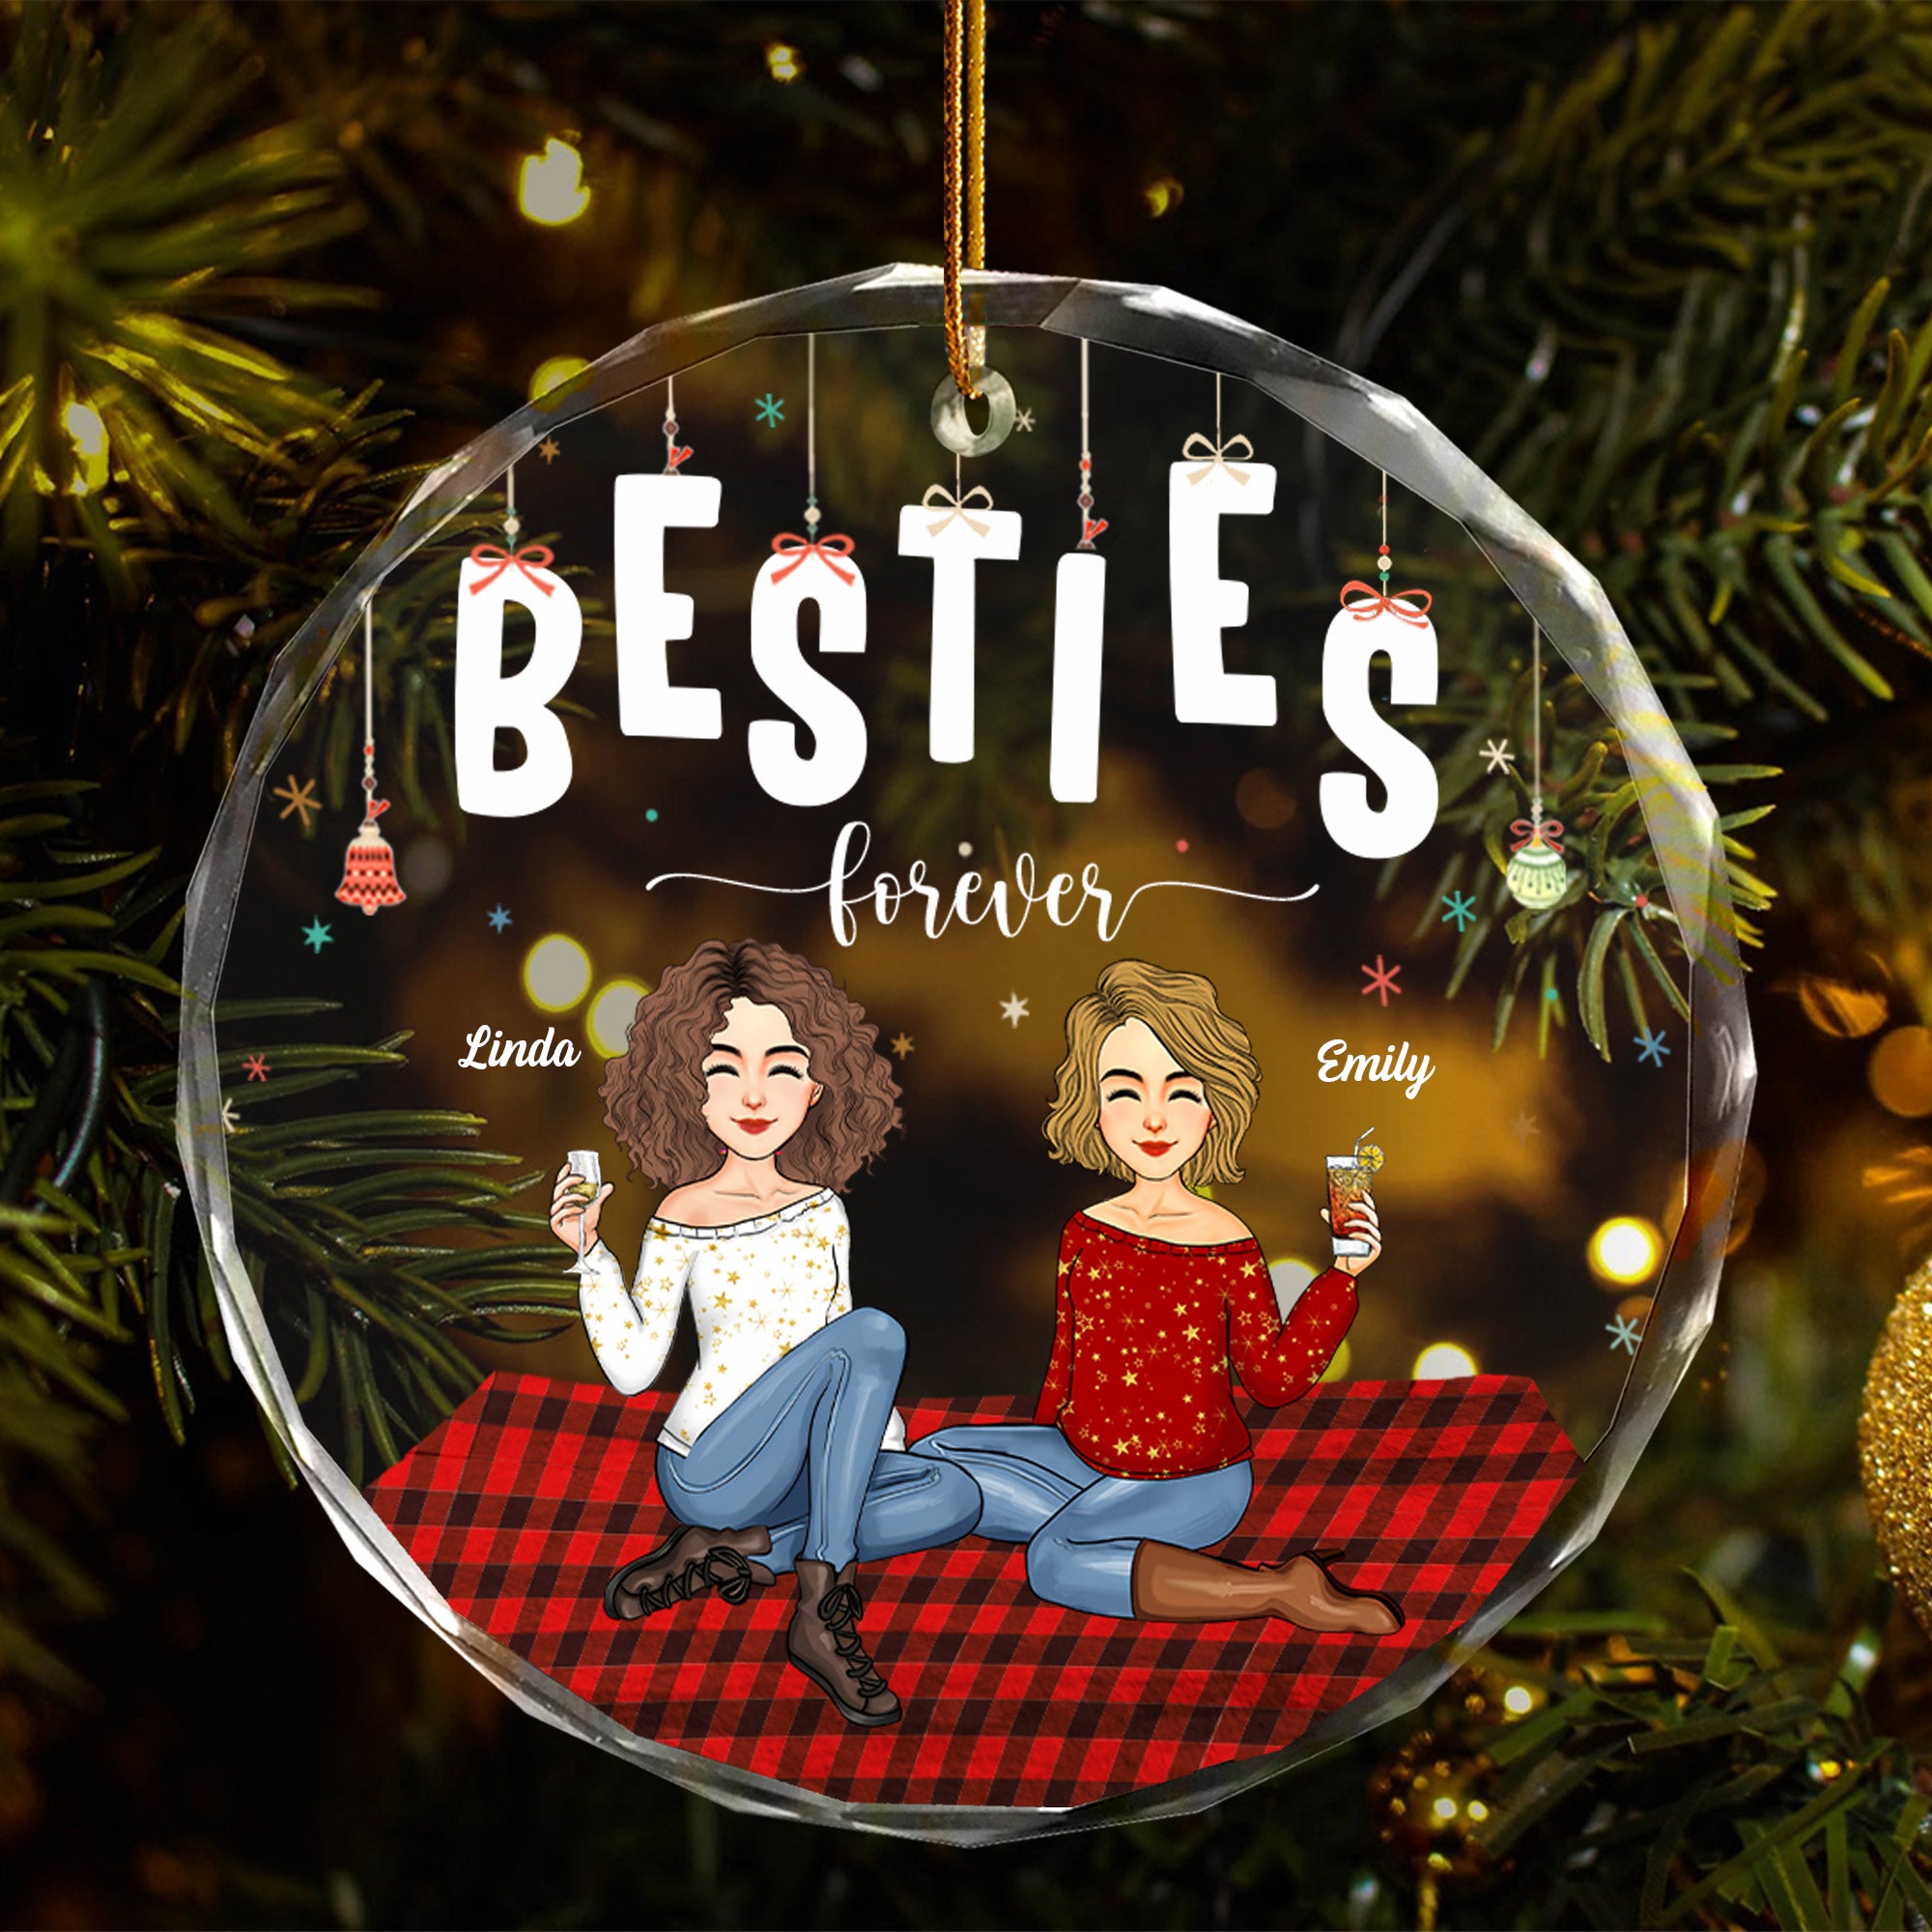 Luxury Ornament Besties Forever - Personalized Glass Ornament Gift For Besties, Best Friends